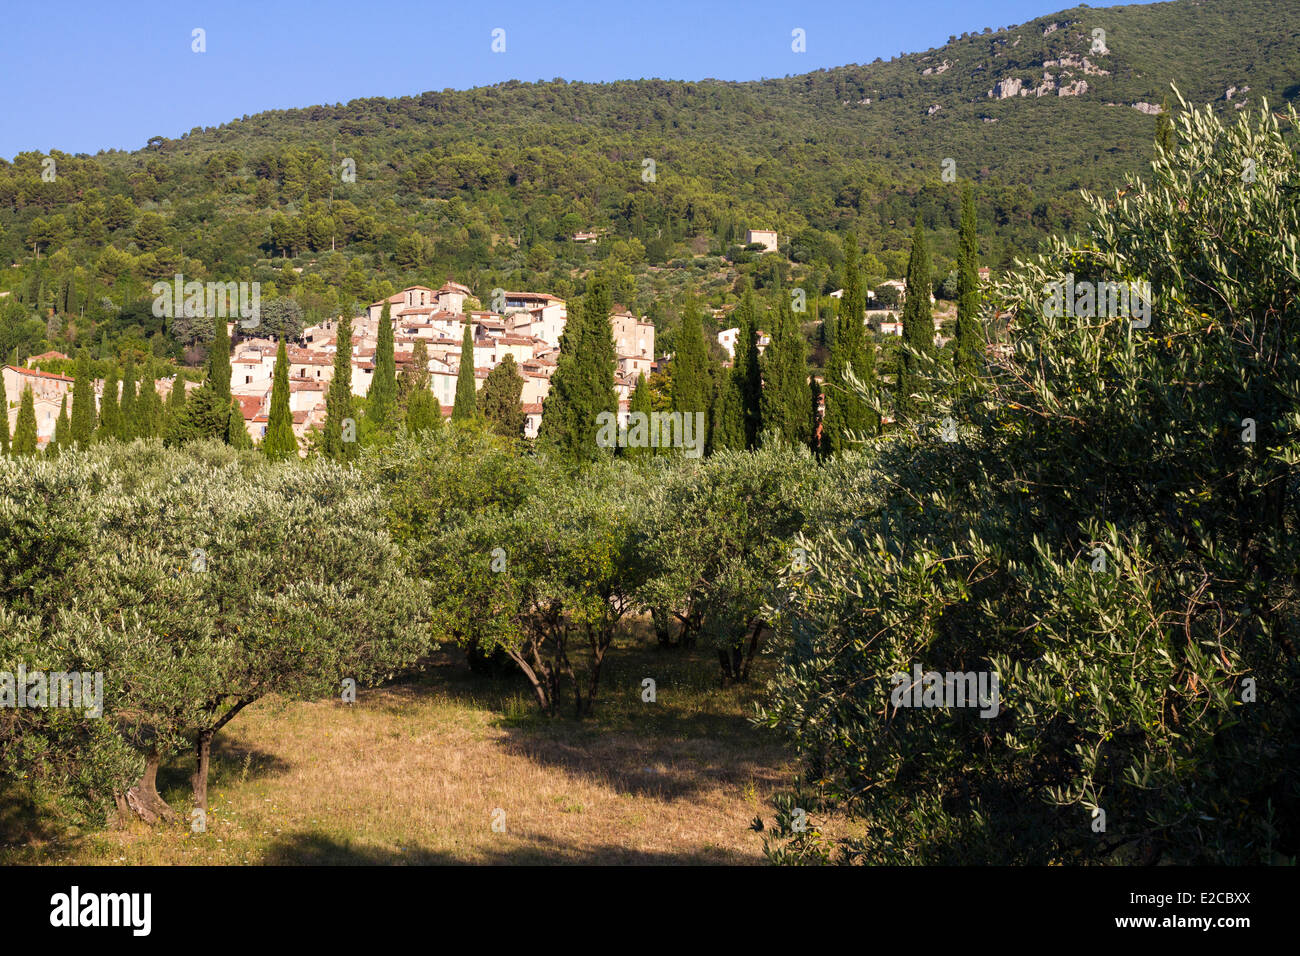 France, Var, Seillans, labelled The Most Beautiful Villages of France, culture of olive tree at foot of village Stock Photo